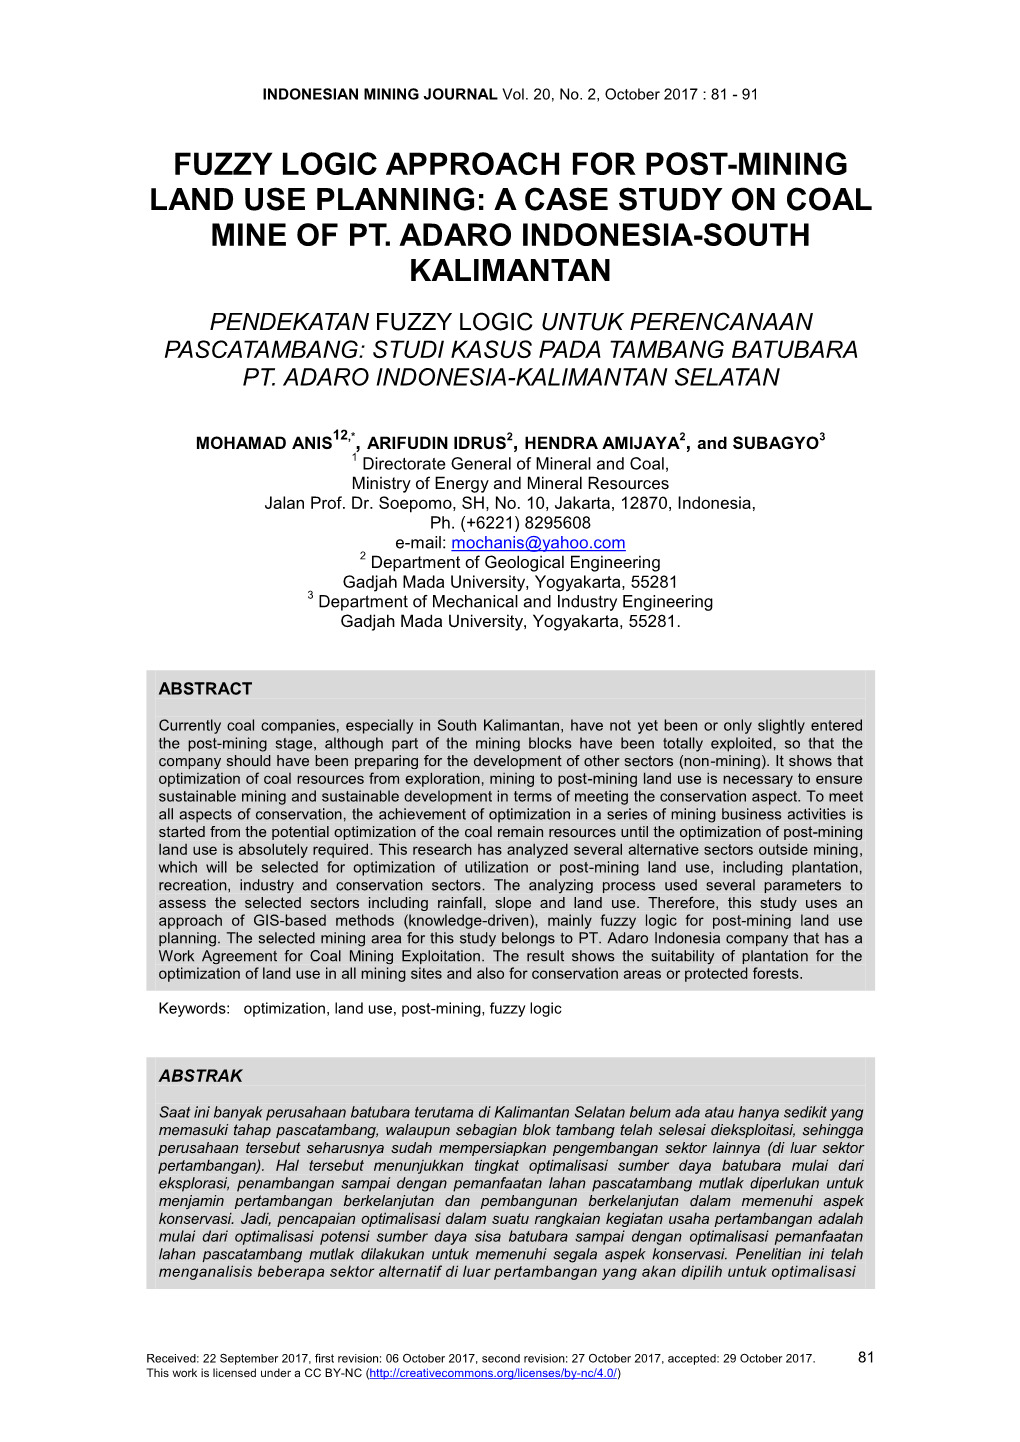 Fuzzy Logic Approach for Post-Mining Land Use Planning: a Case Study on Coal Mine of Pt